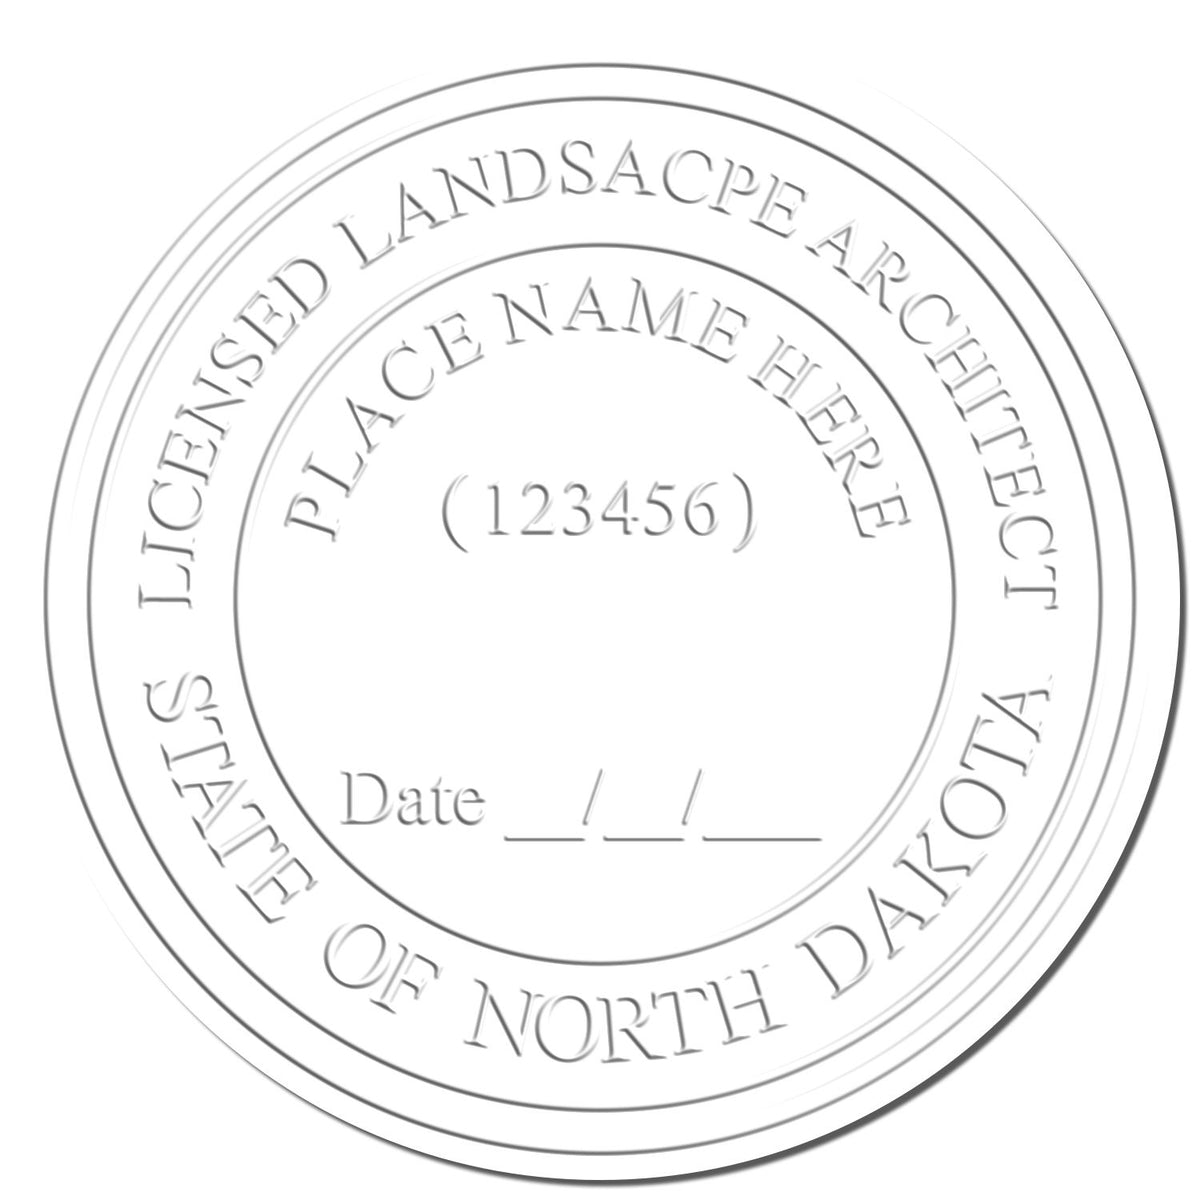 This paper is stamped with a sample imprint of the Soft Pocket North Dakota Landscape Architect Embosser, signifying its quality and reliability.